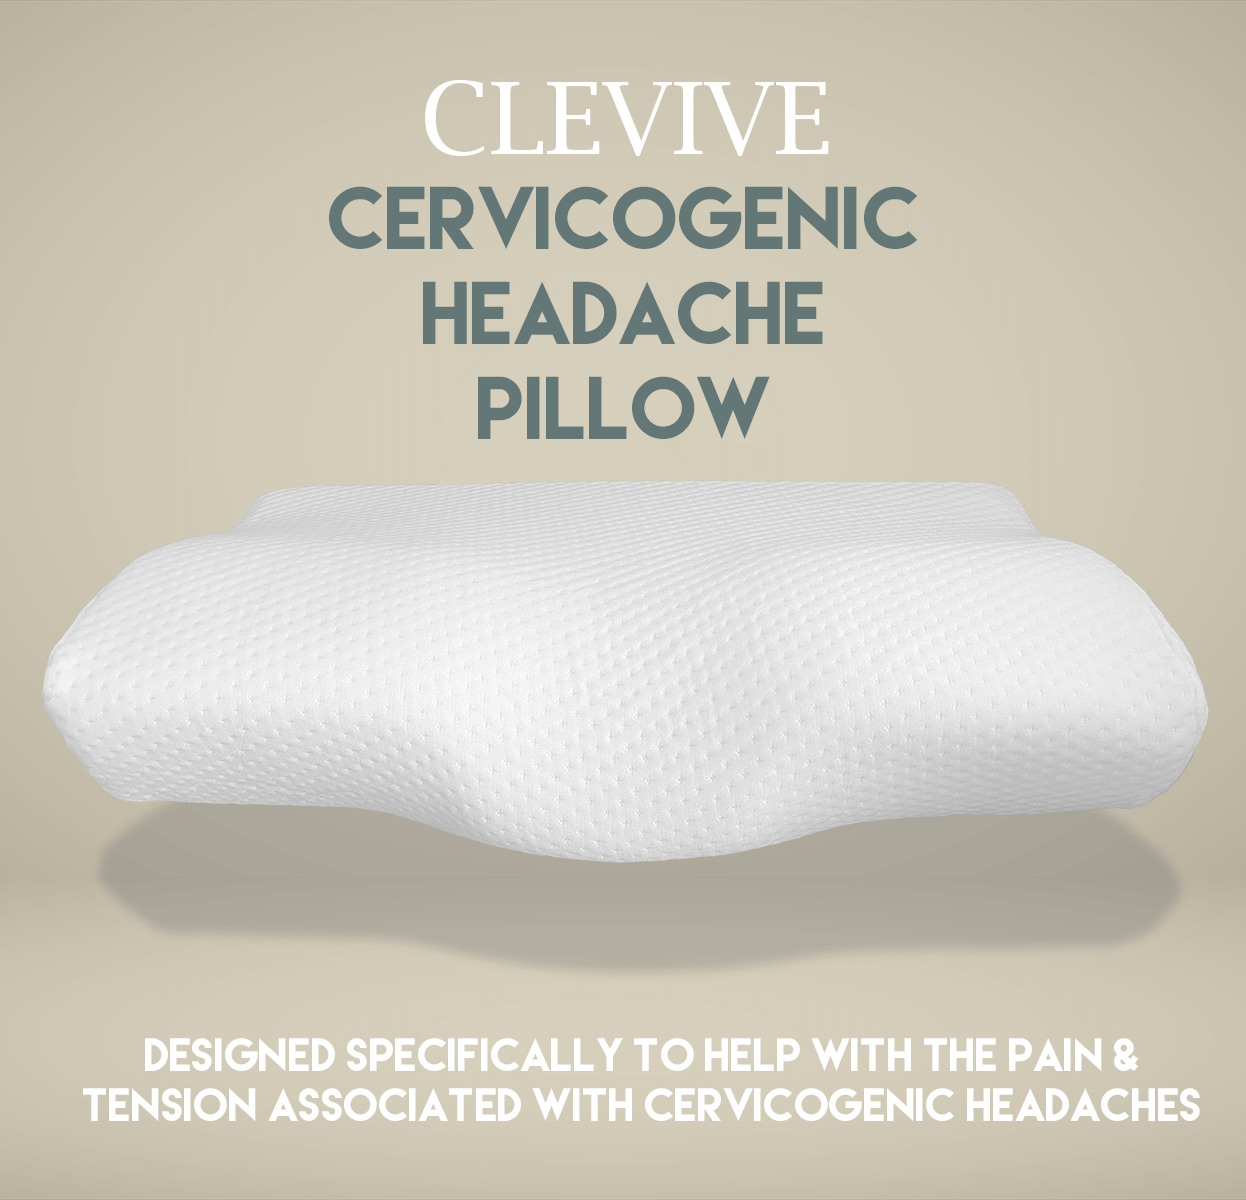 https://clevive.com/wp-content/uploads/2021/04/Pillow-For-Cervicogenic-Headaches.png